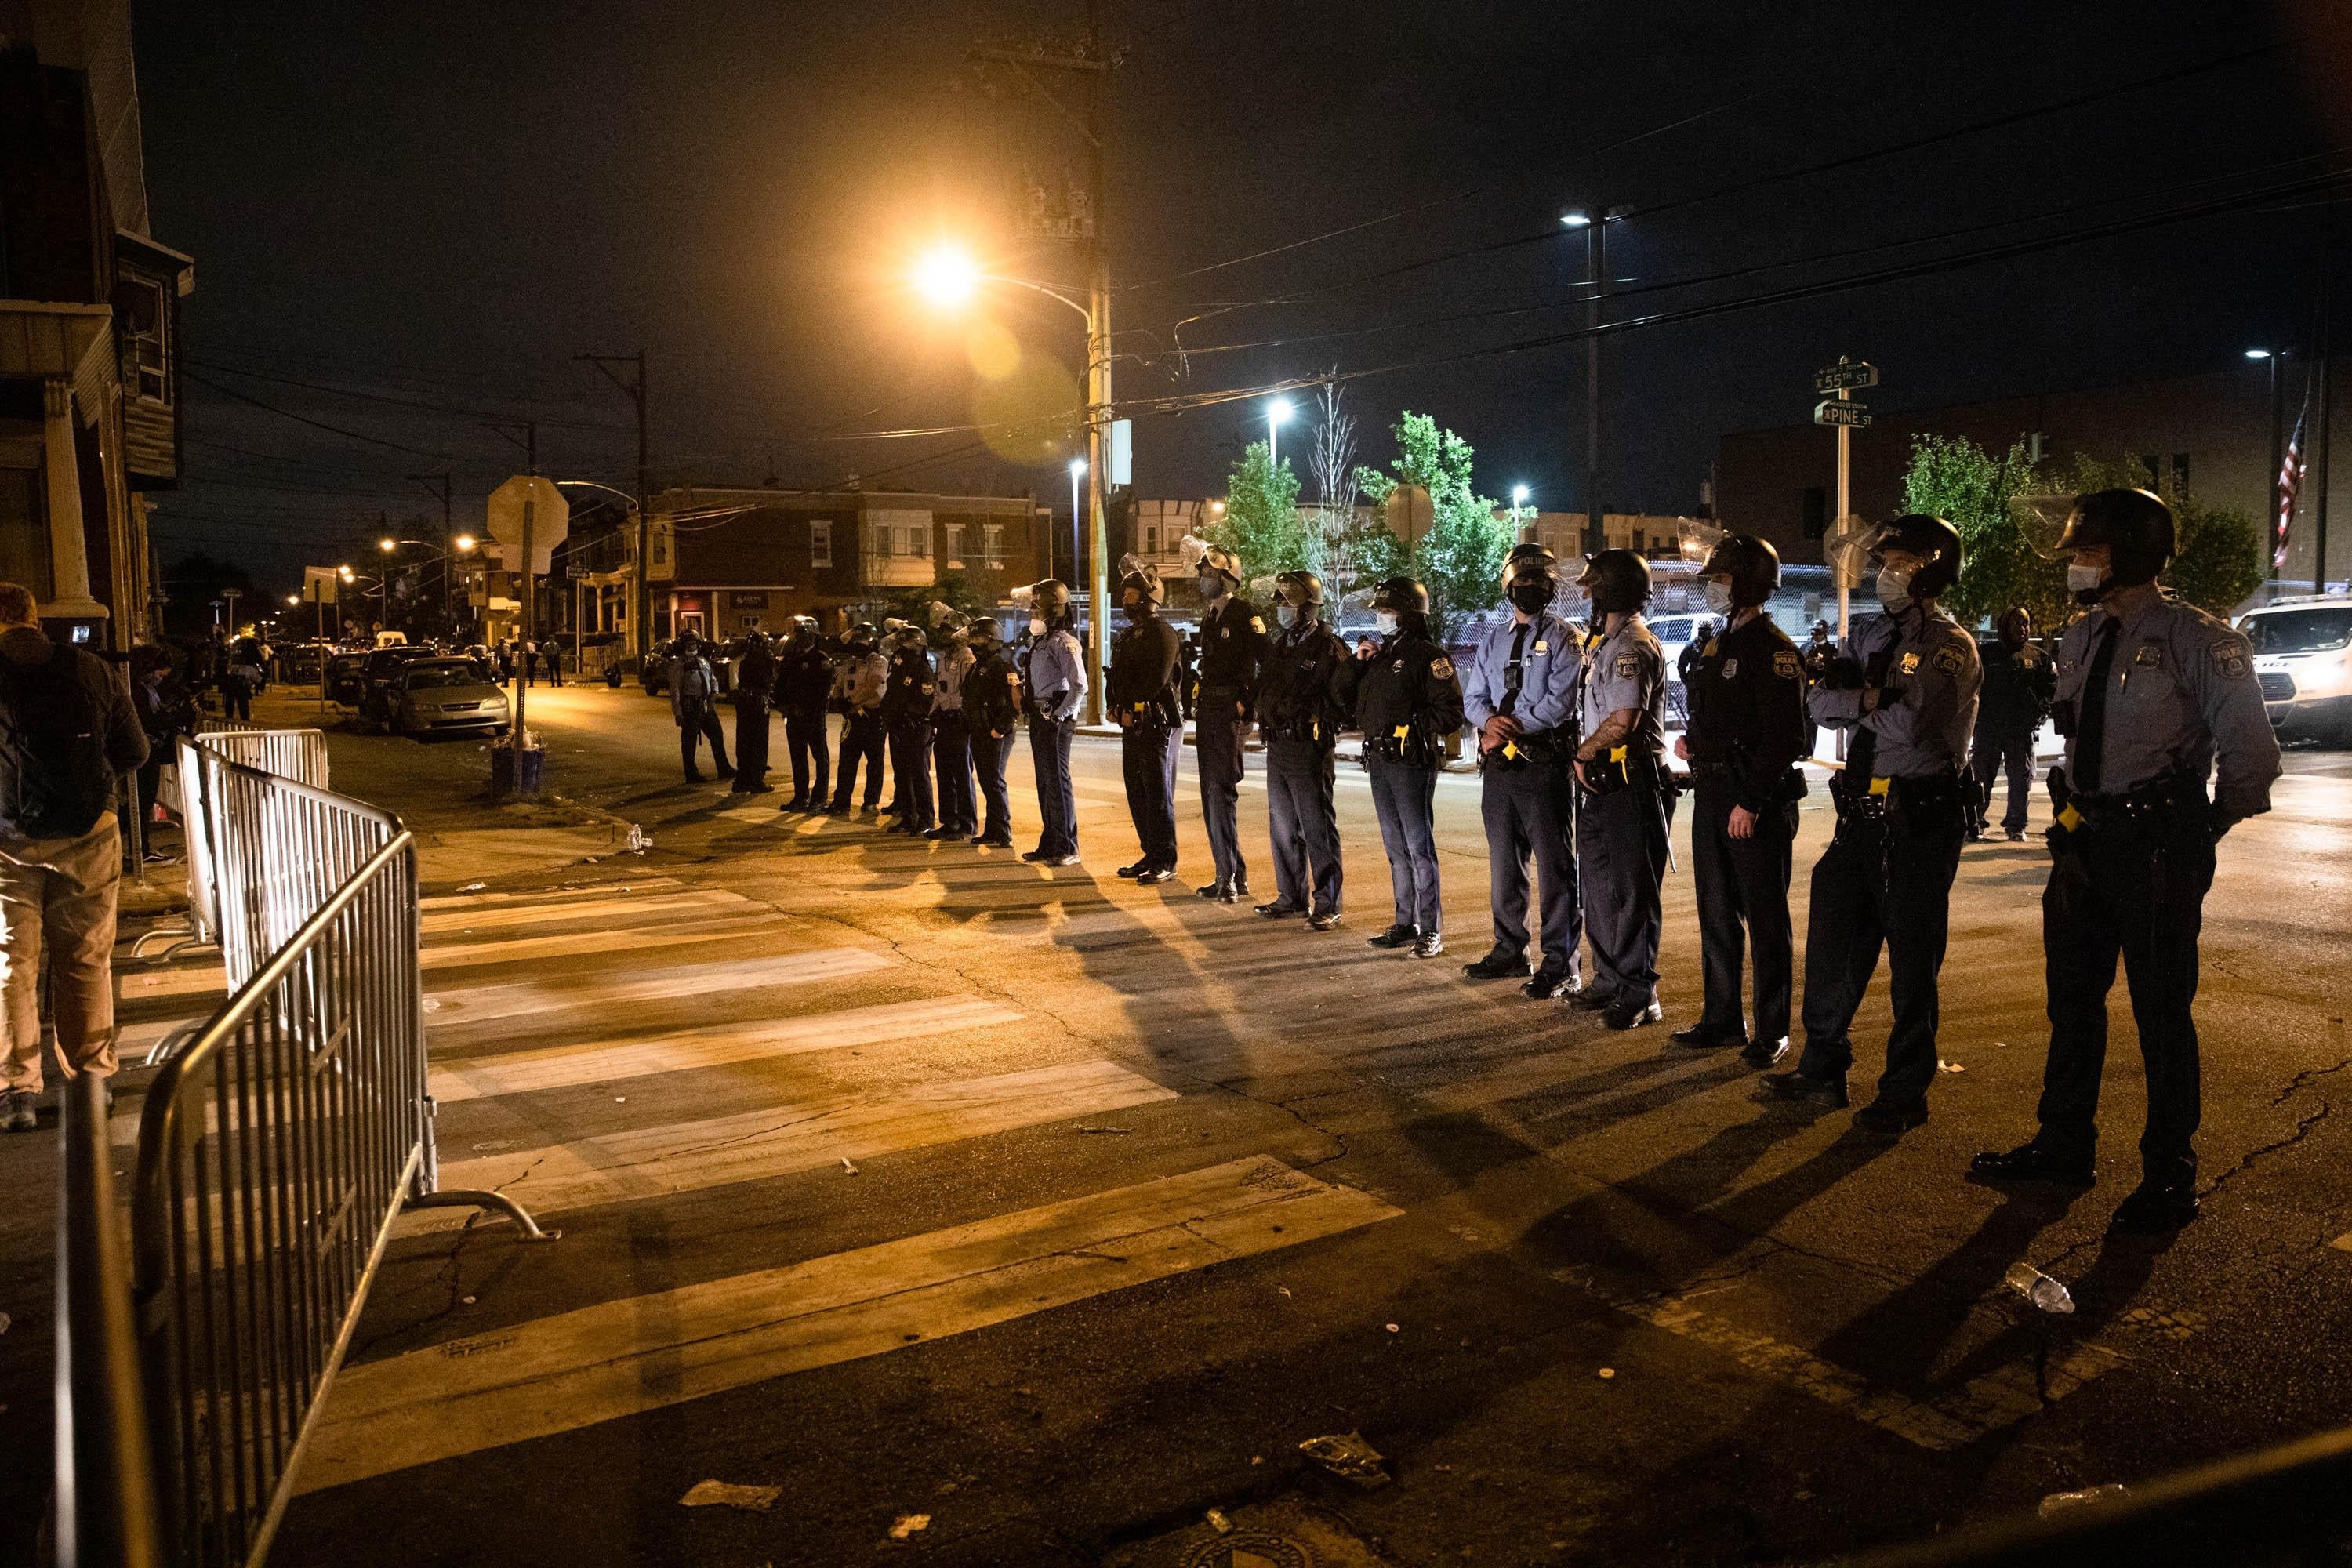 A line of police officers in masks behind a barrier at night.